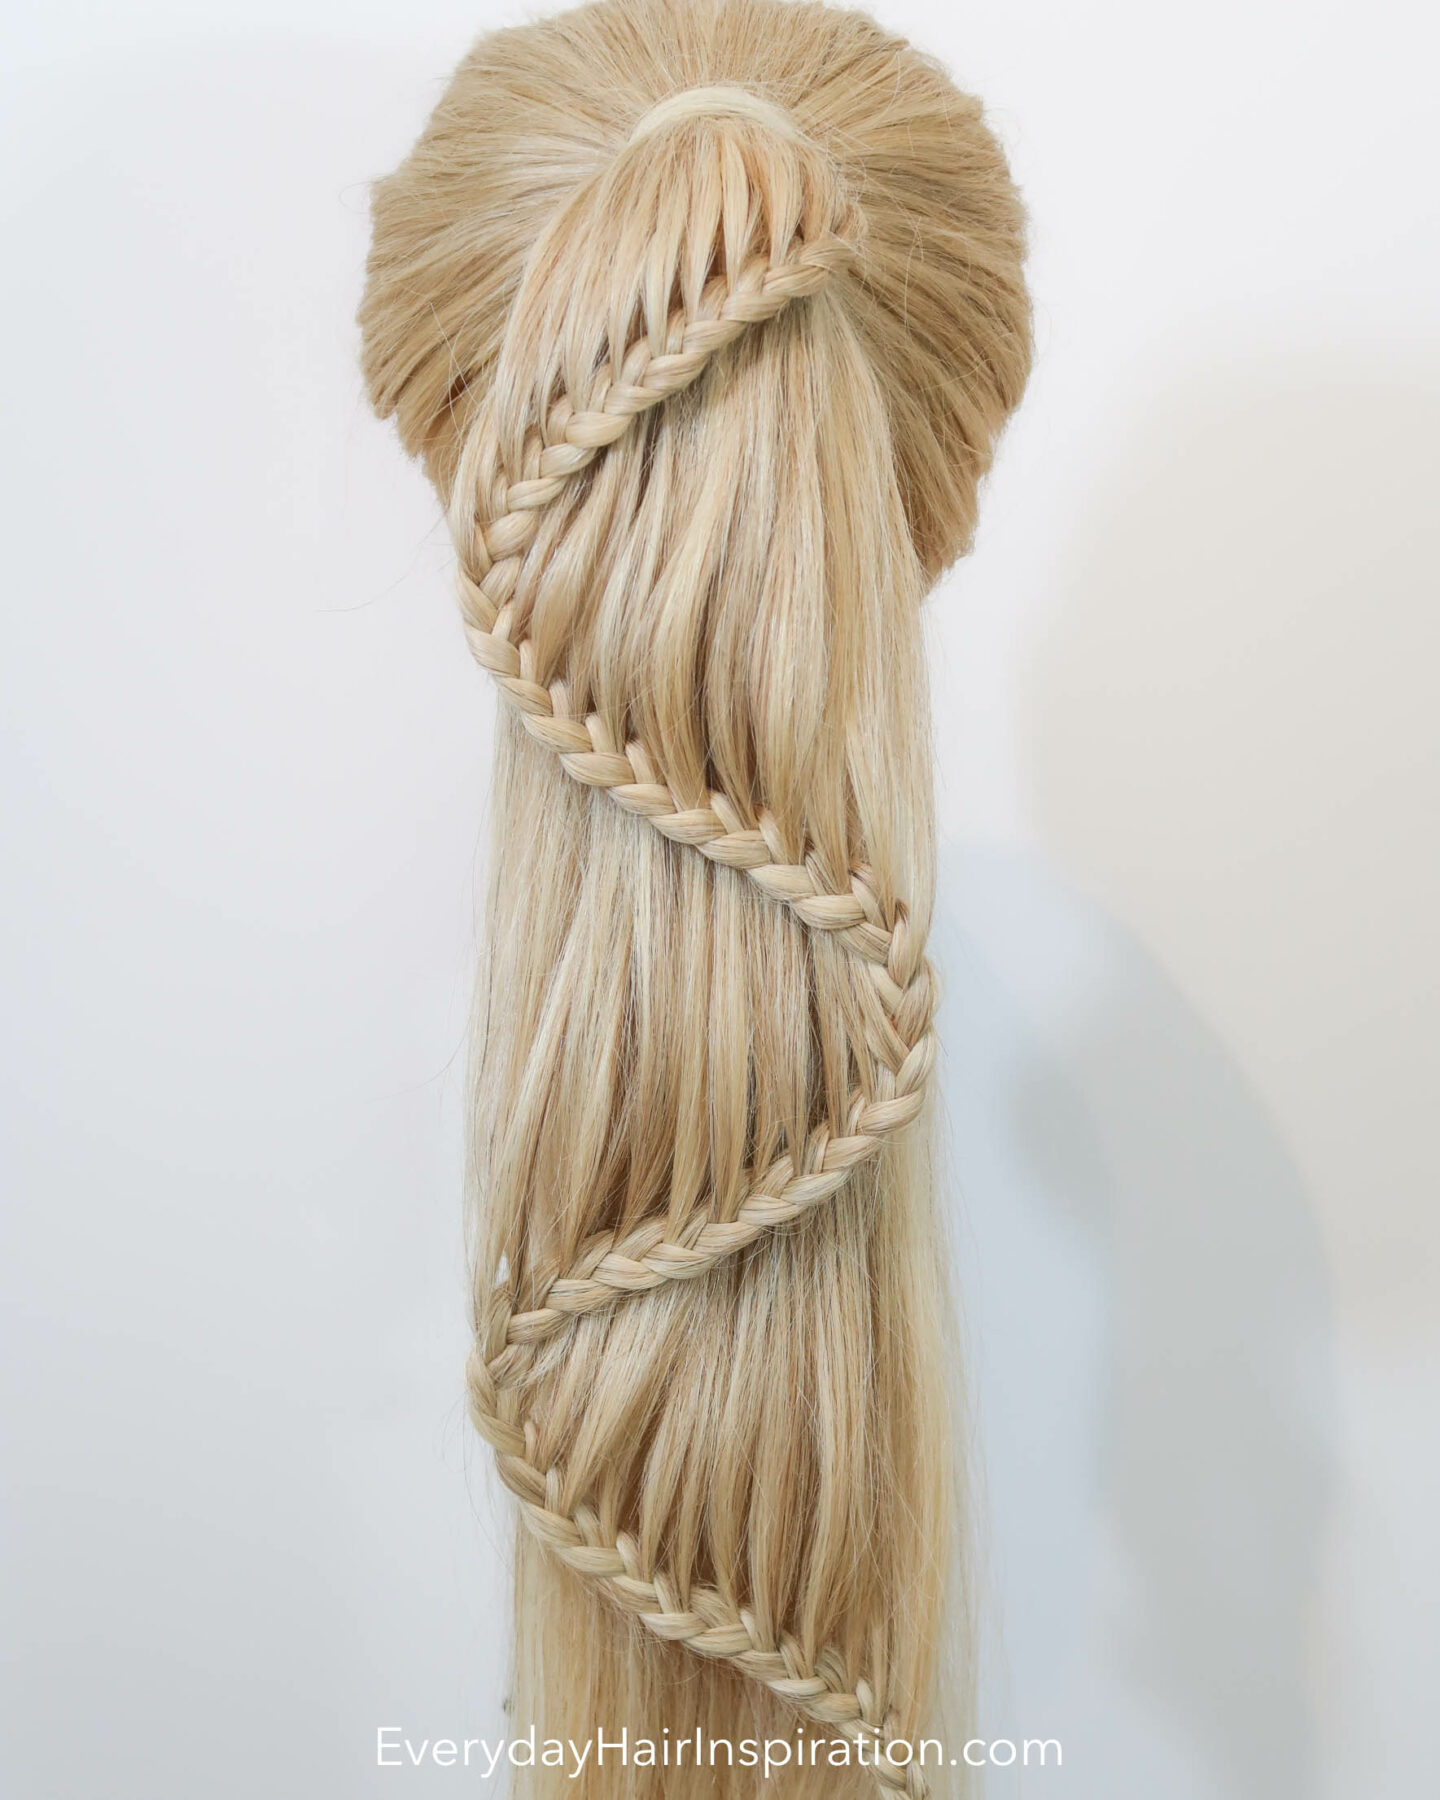 Blonde hairdresser doll seen from the back with a high ponytail with a braid in the hair. The braid is curving like an "s" shape down the hair. 